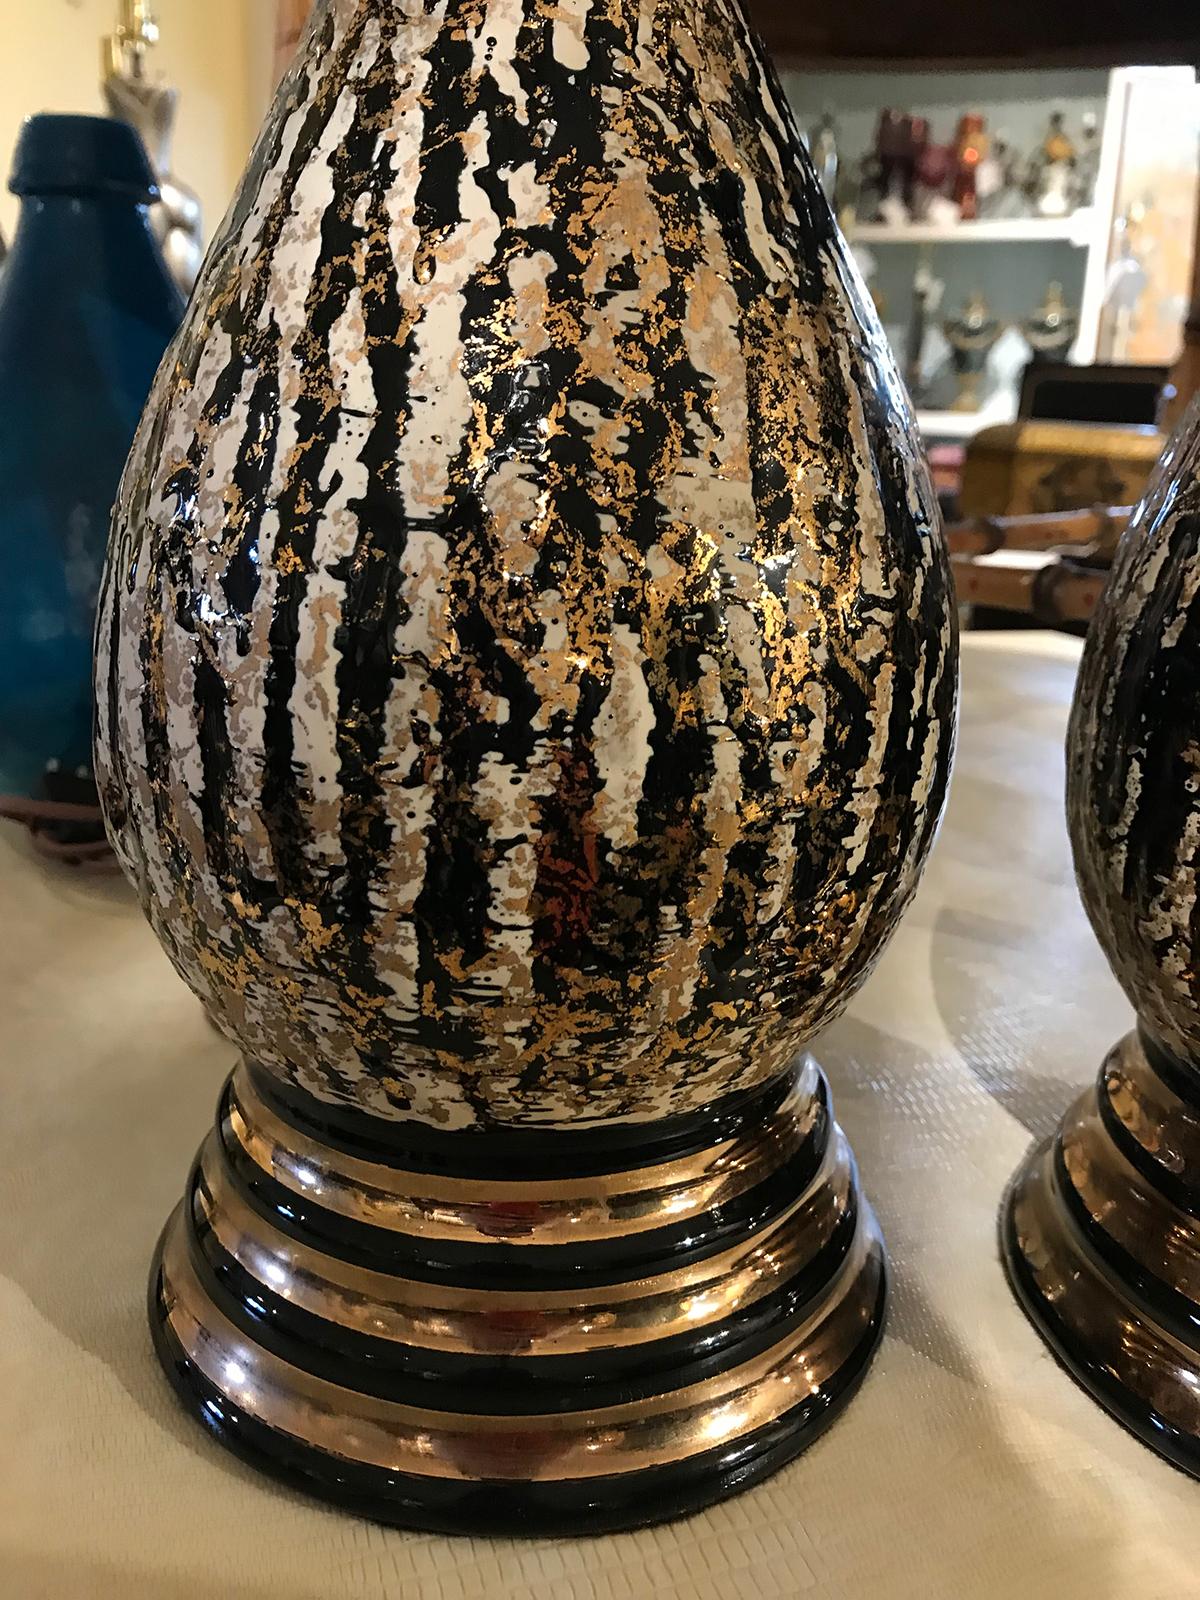 Pair of Mid-20th Century Black and Gold Glazed Pottery Lamps, circa 1950s-1960s For Sale 1